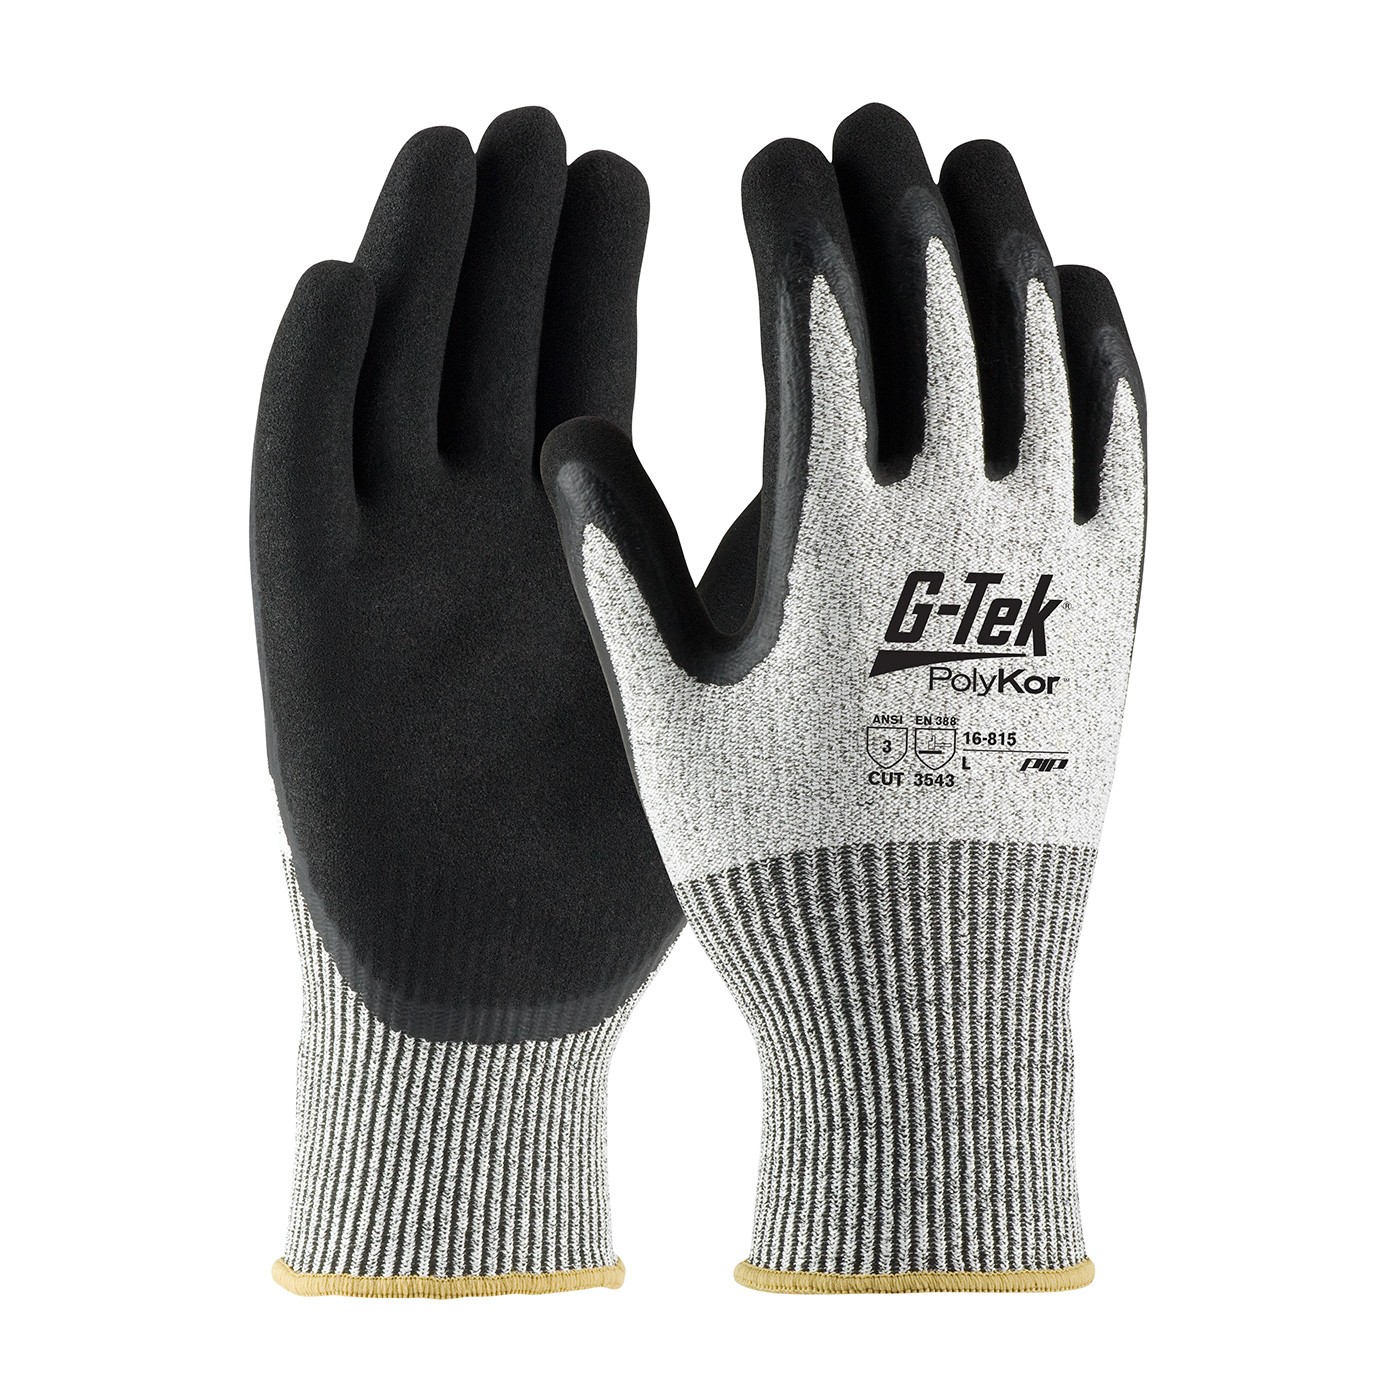 G-Tek® PolyKor® Seamless Knit PolyKor® Blended Glove with Double-Dipped Latex Coated MicroSurface Grip on Palm & Fingers  (#16-815)